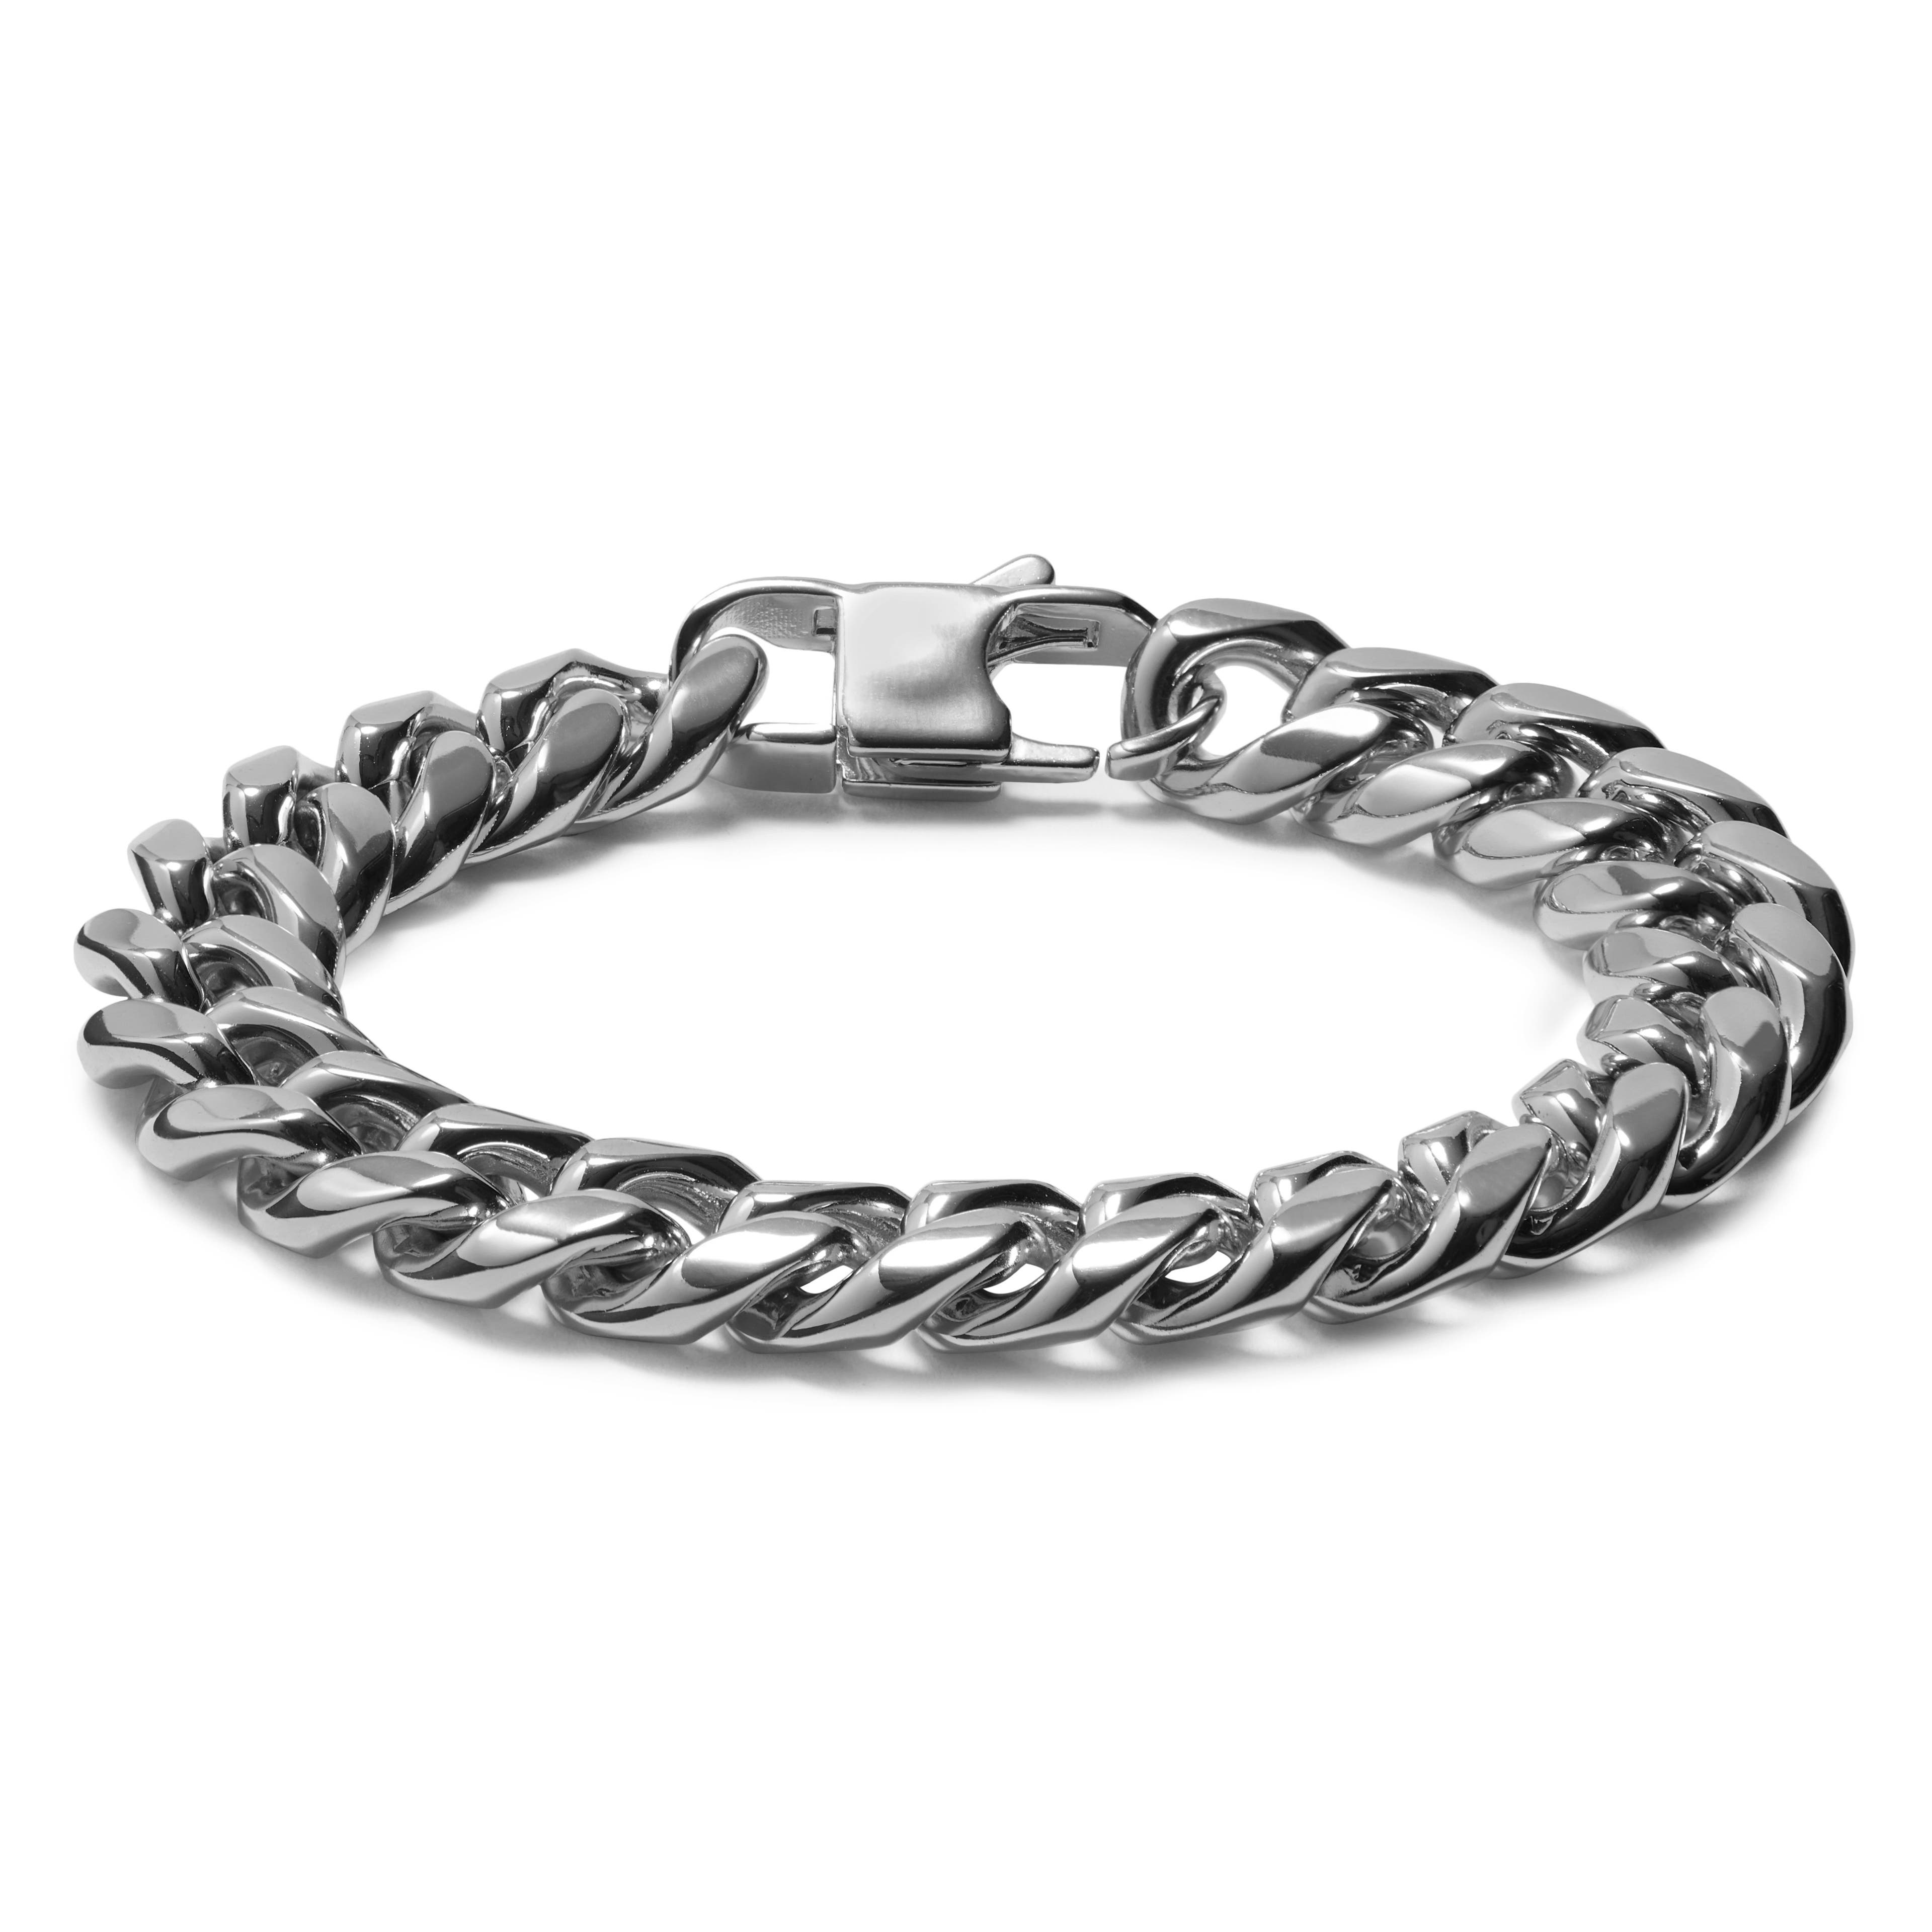 12mm Silver-Tone Stainless Steel Curb Chain Bracelet